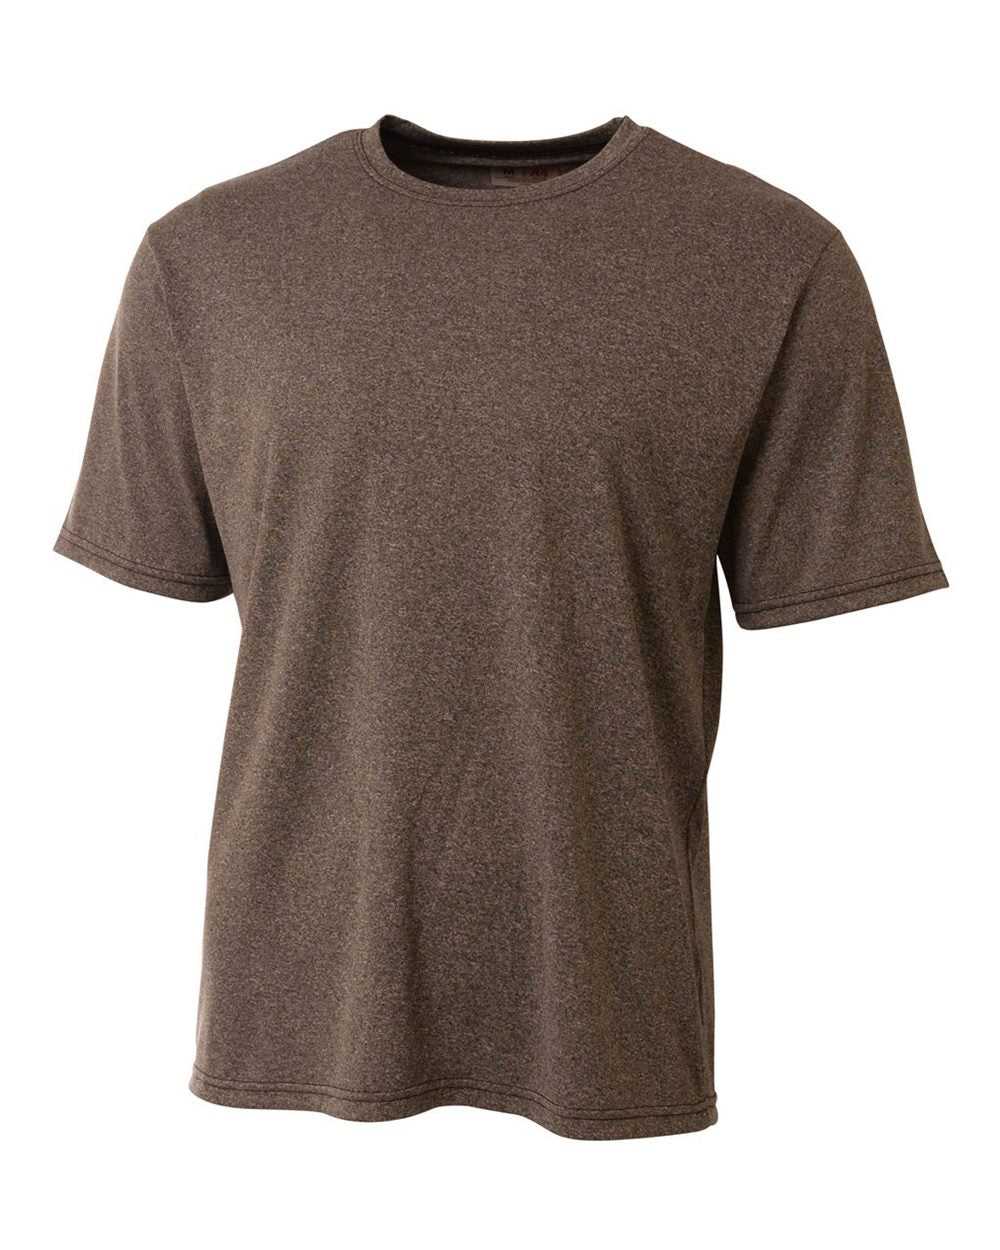 A4 N3381 Topflight Heather Tee - Charcoal - HIT a Double